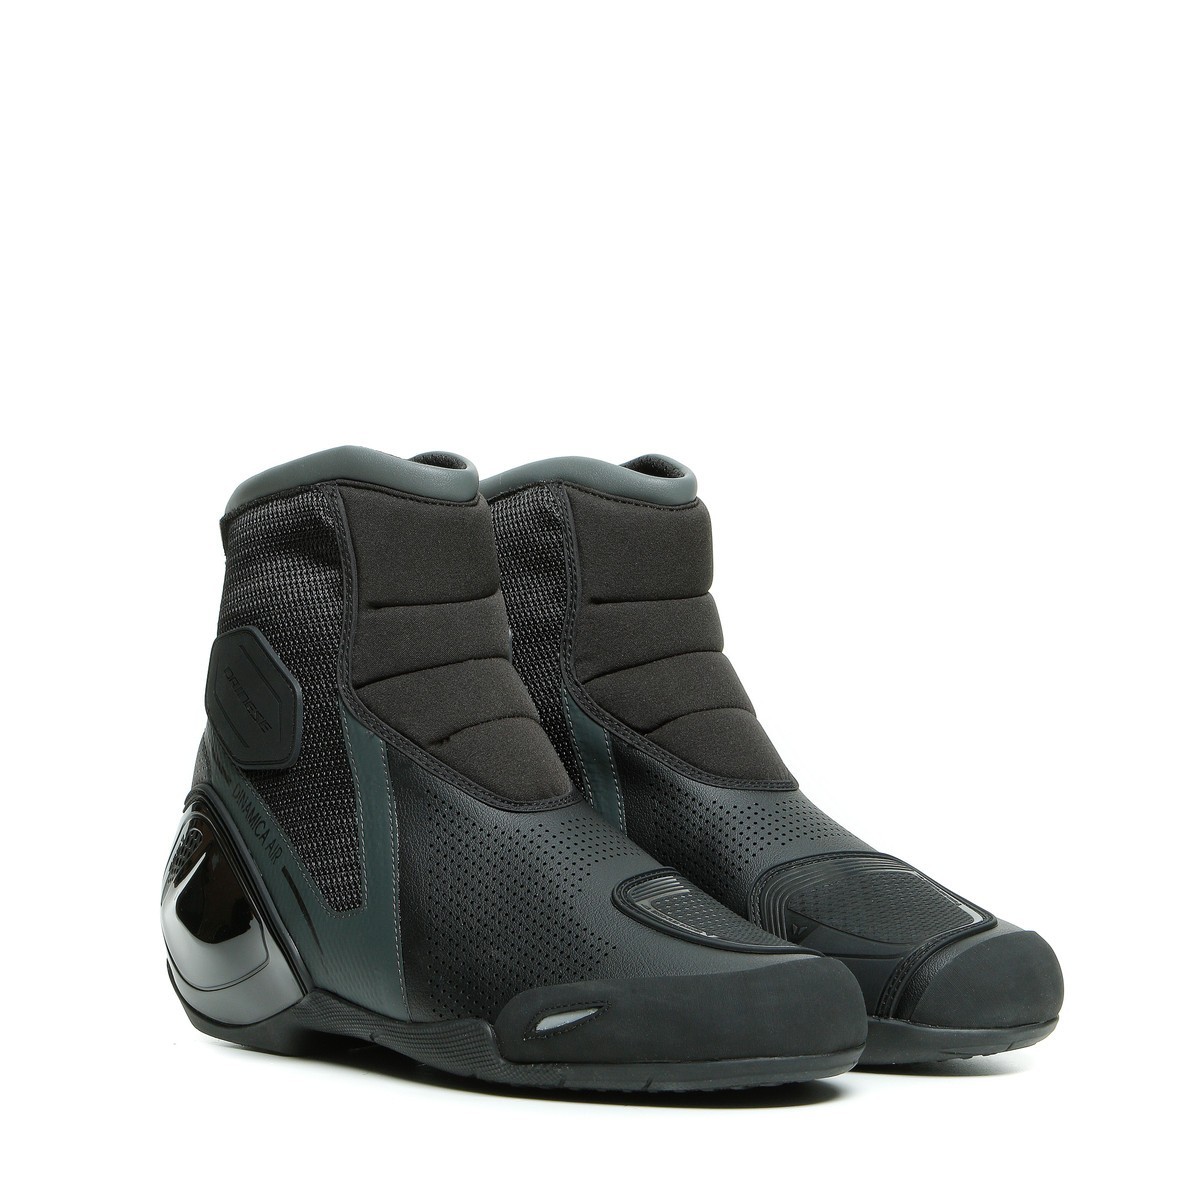 DAINESE DINAMICA AIR SHOES